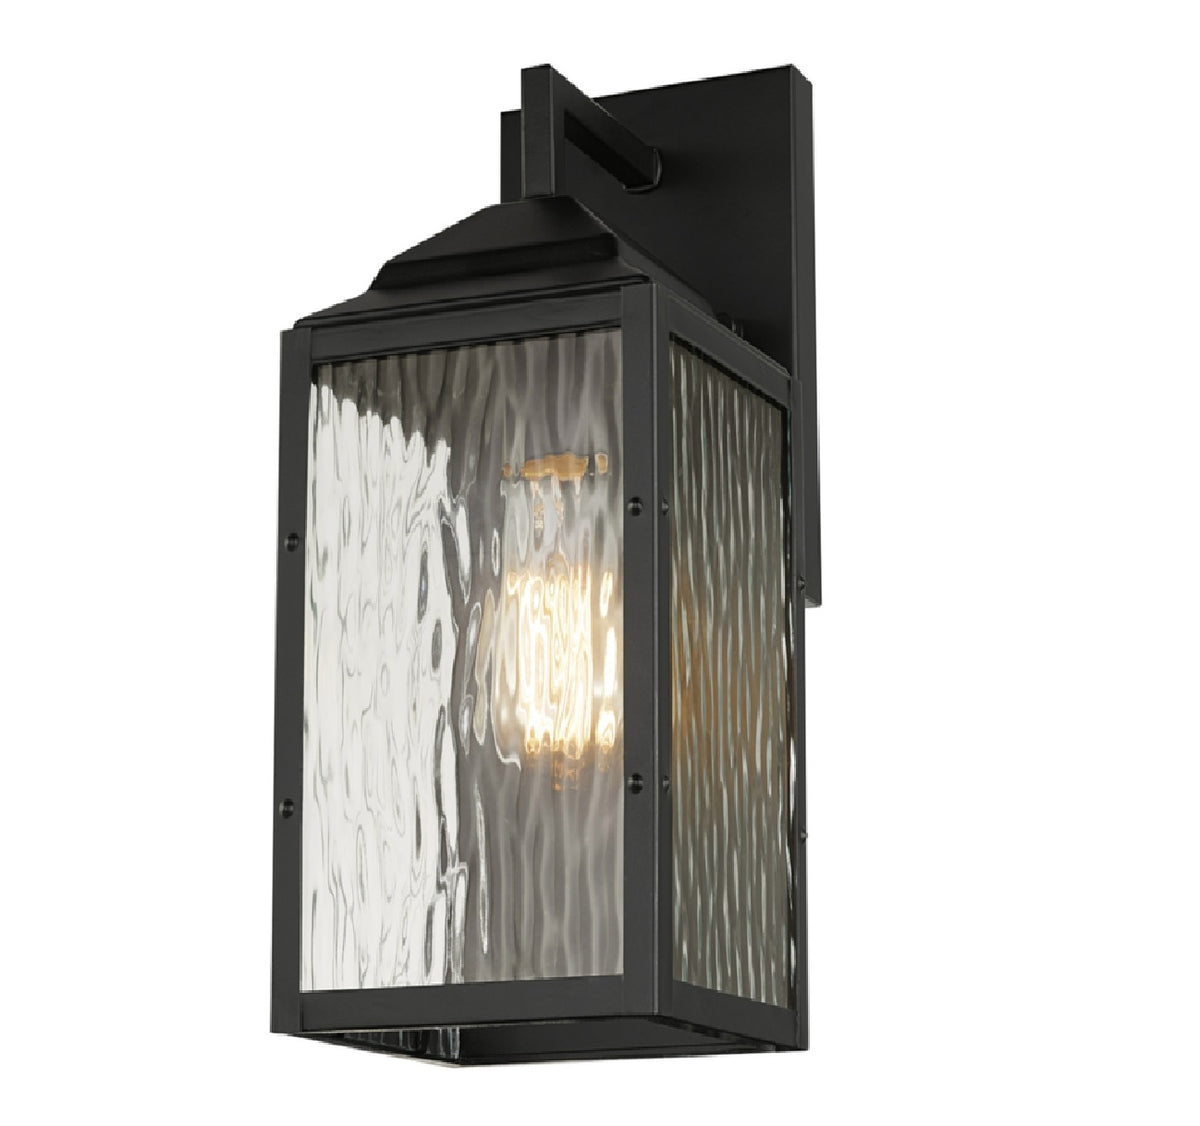 Globe Electric 44216 Miller Downlight Wall Sconce, Black